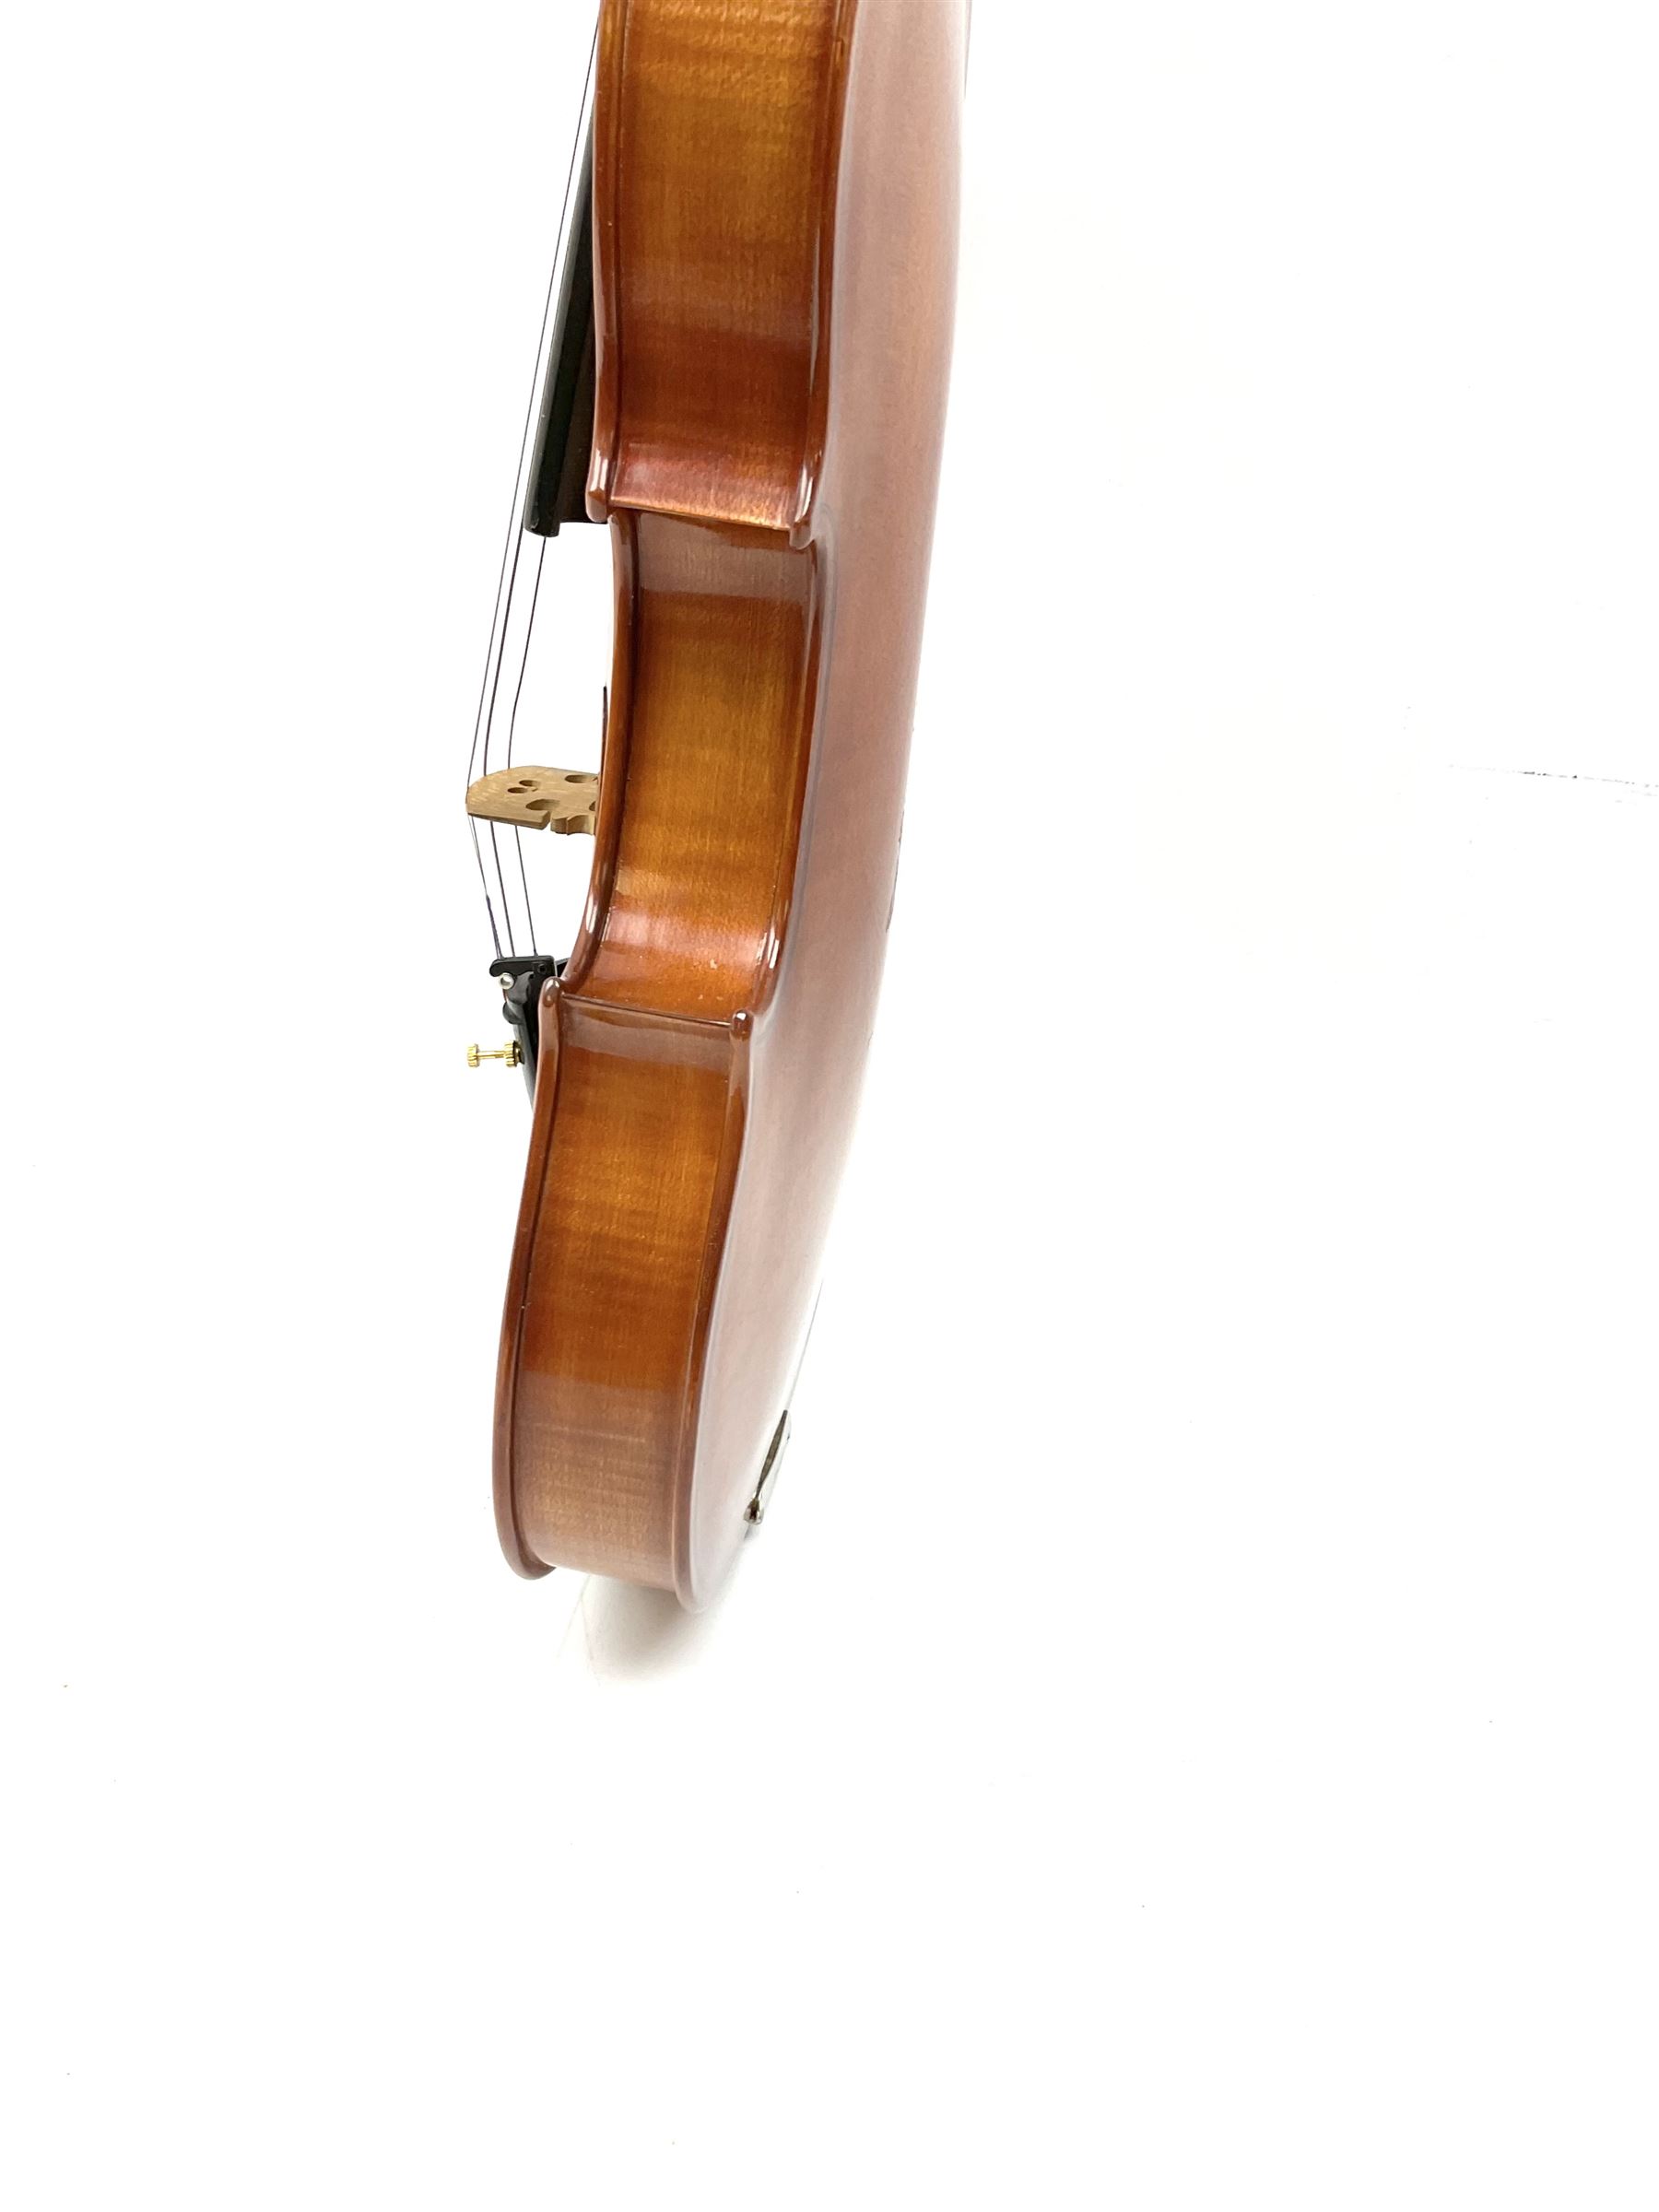 Modern violin with 36cm two-piece maple back and ribs and spruce top 60cm overall - Image 15 of 16